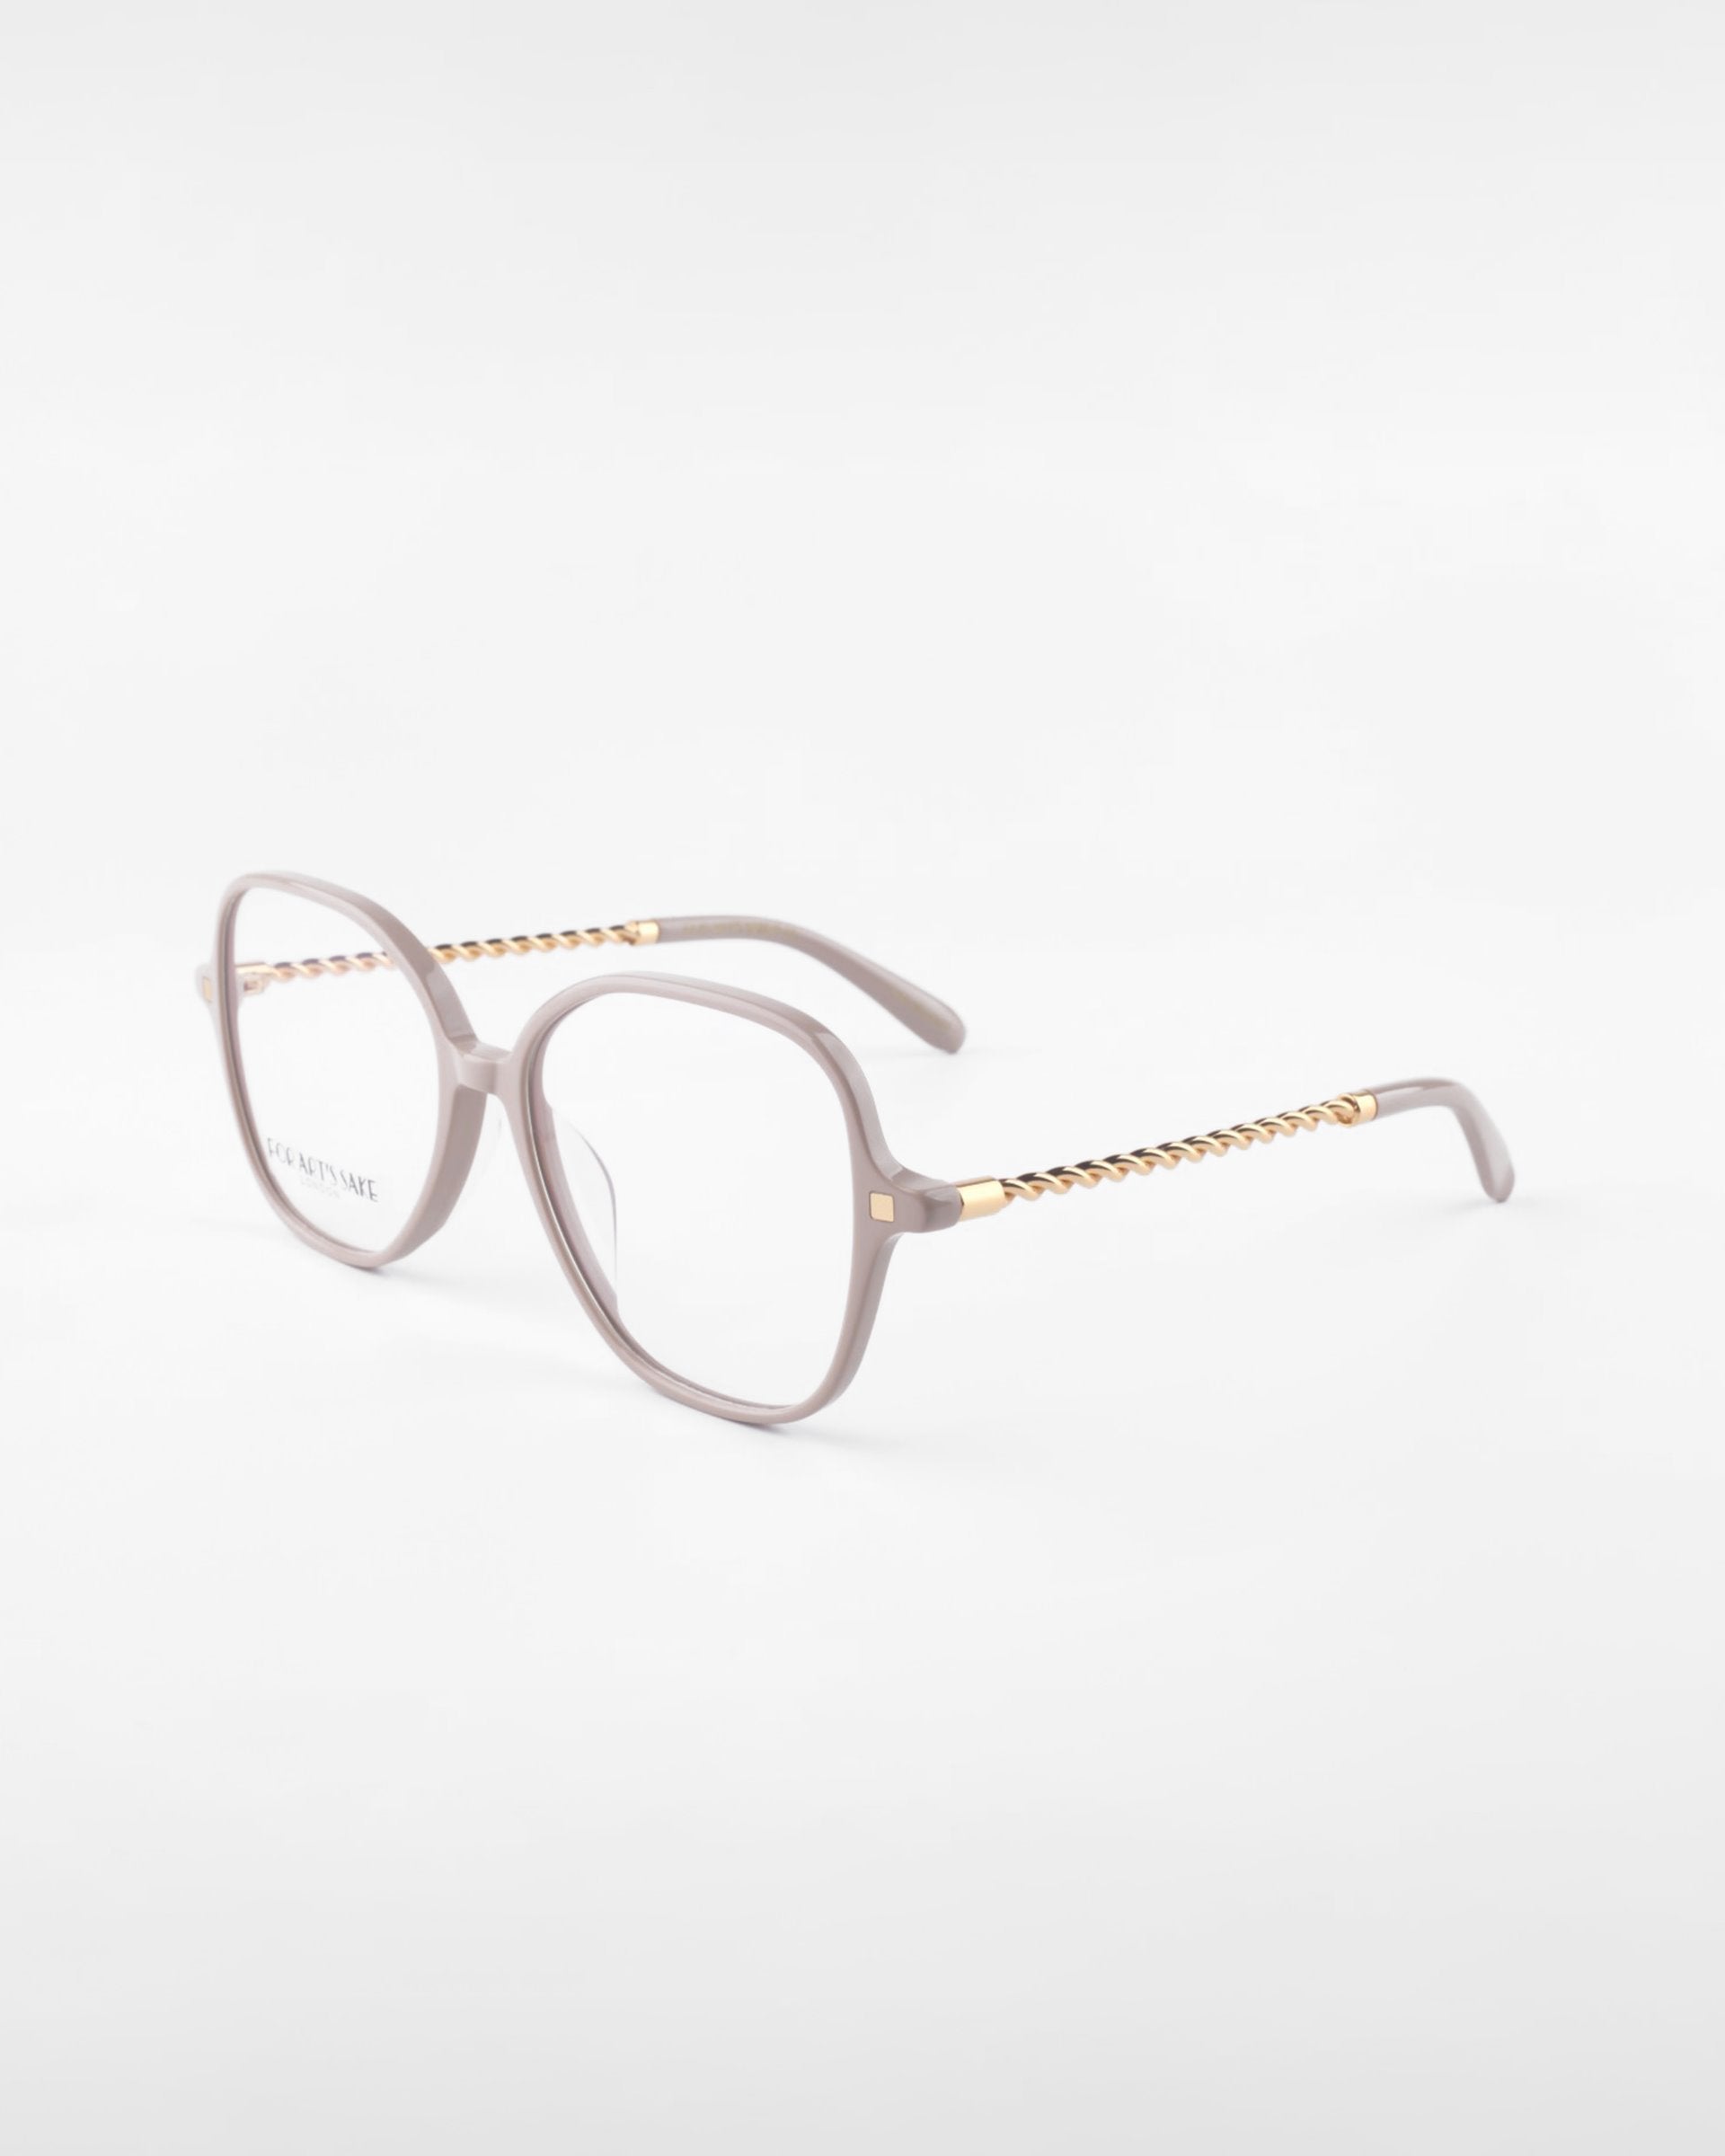 A pair of stylish For Art&#39;s Sake® Dumpling eyeglasses with light pink, rectangular frames and gold detailing on the arms. The temples feature a twisted gold design, adding a touch of elegance. Complete with UV Protection, these glasses are perfect for both fashion and function against harmful rays.